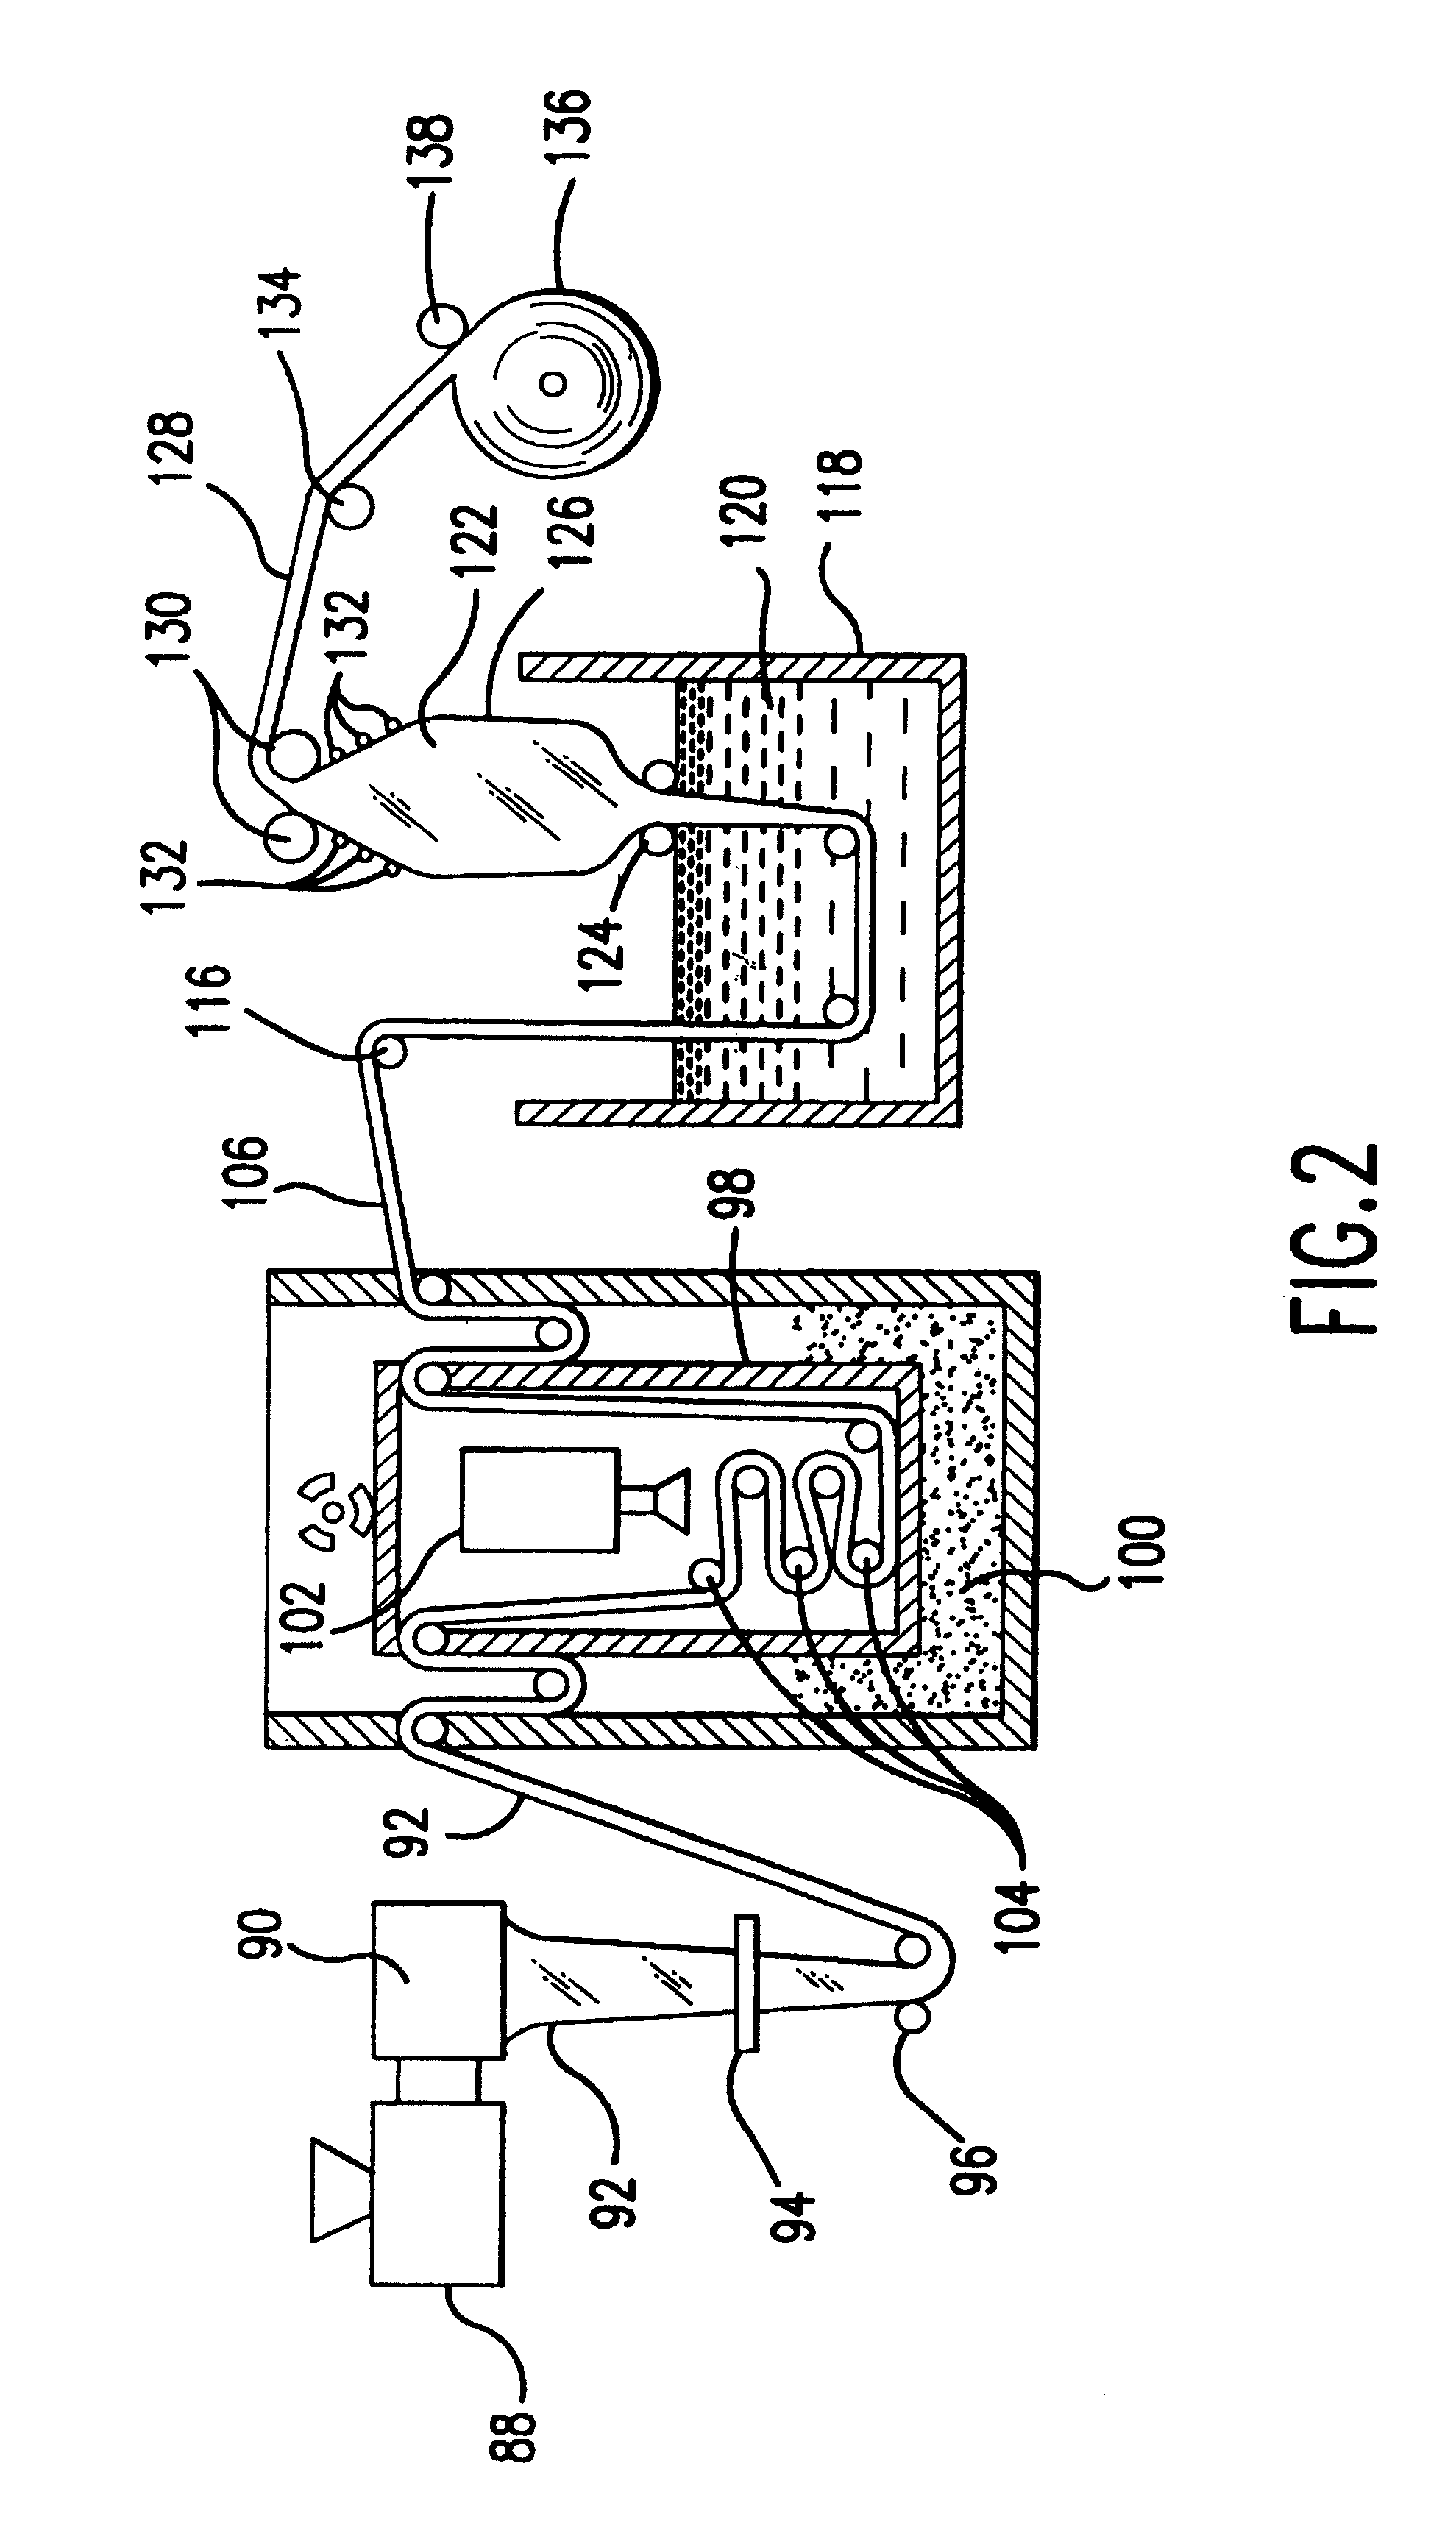 Heat-shrinkable multilayer packaging film comprising inner layer comprising a polyester